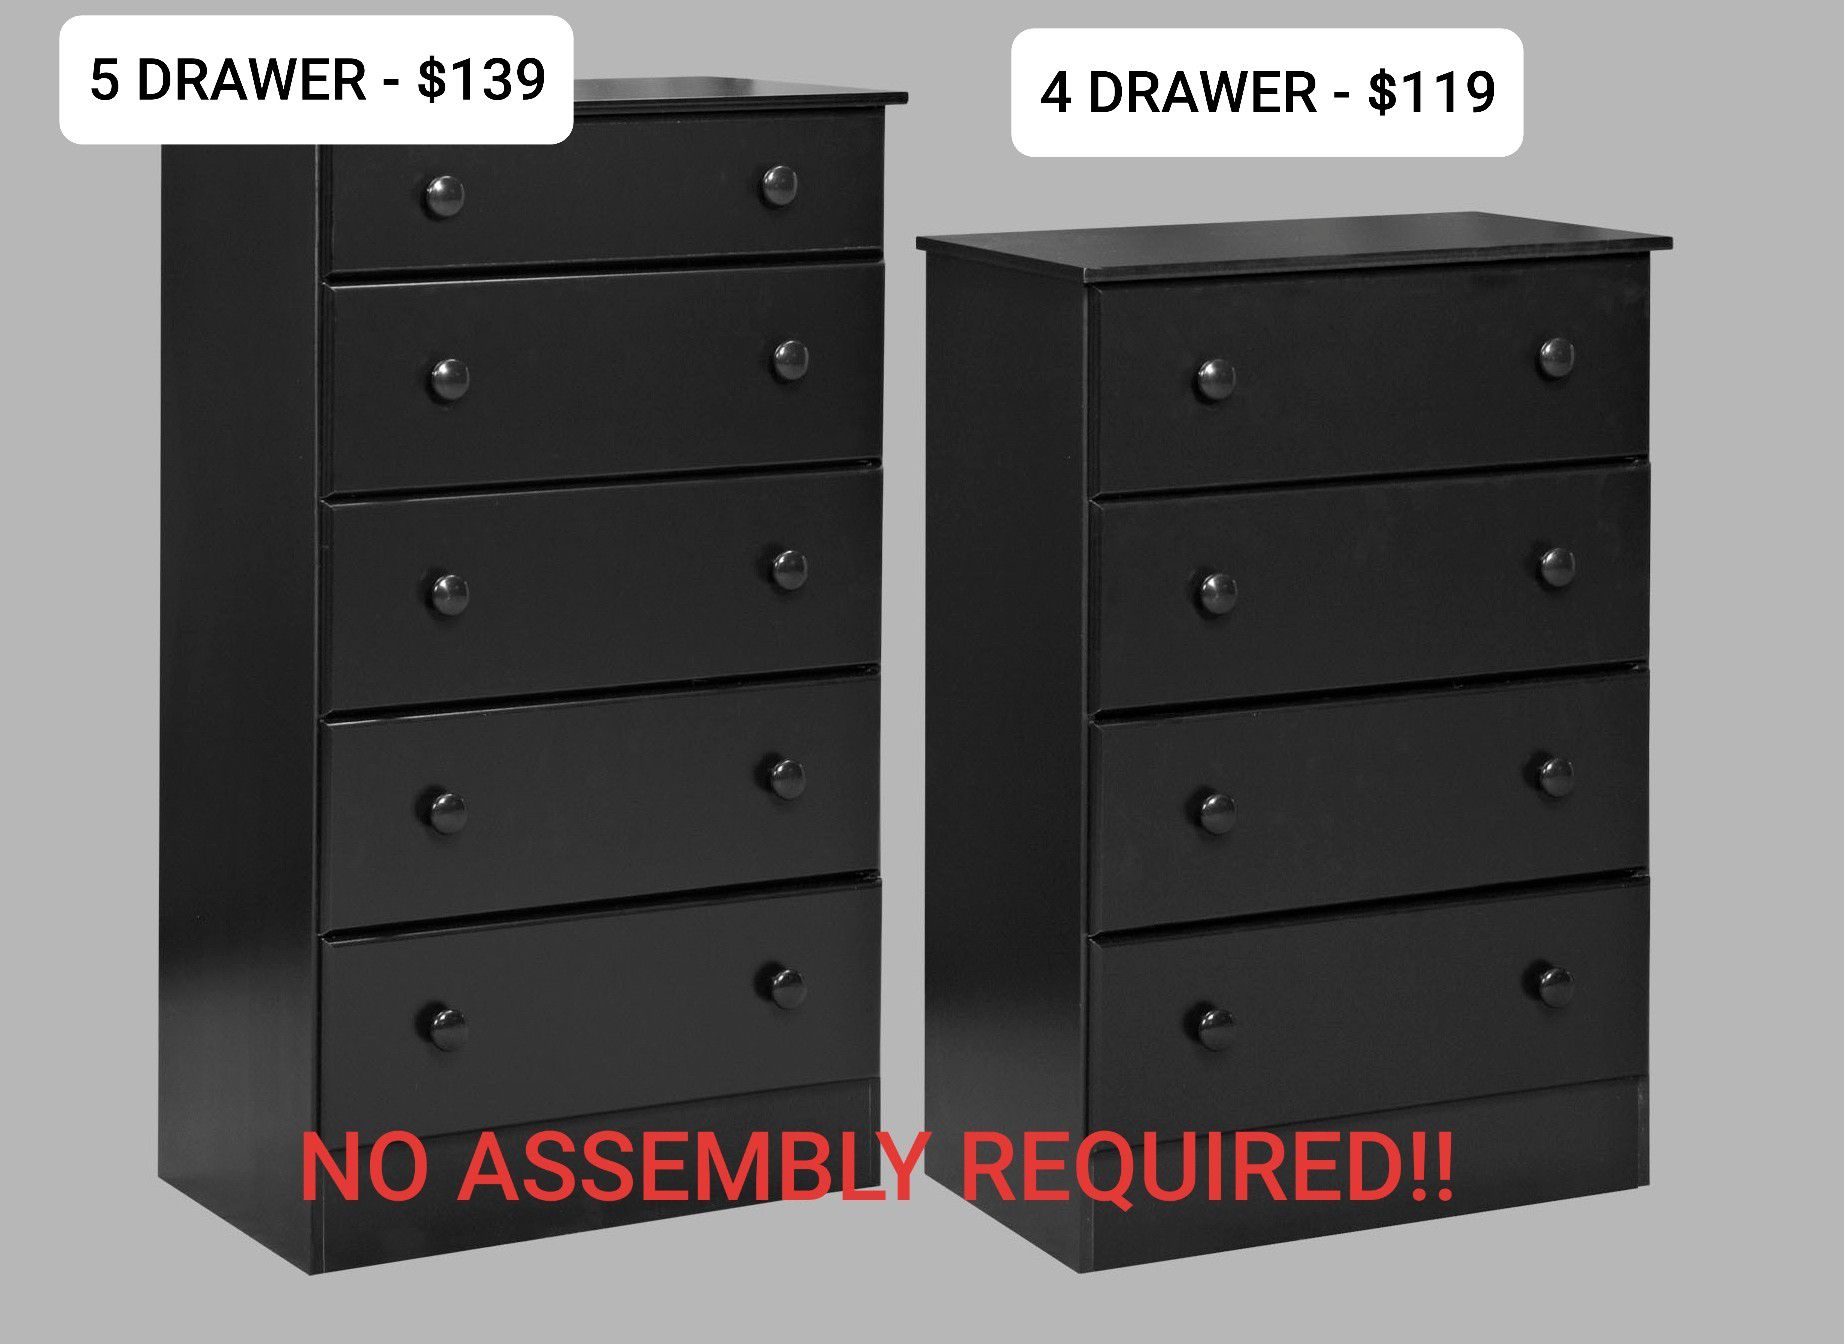 BRAND NEW 4 AND 5 DRAWER DRESSERS - NO ASSEMBLY REQUIRED!